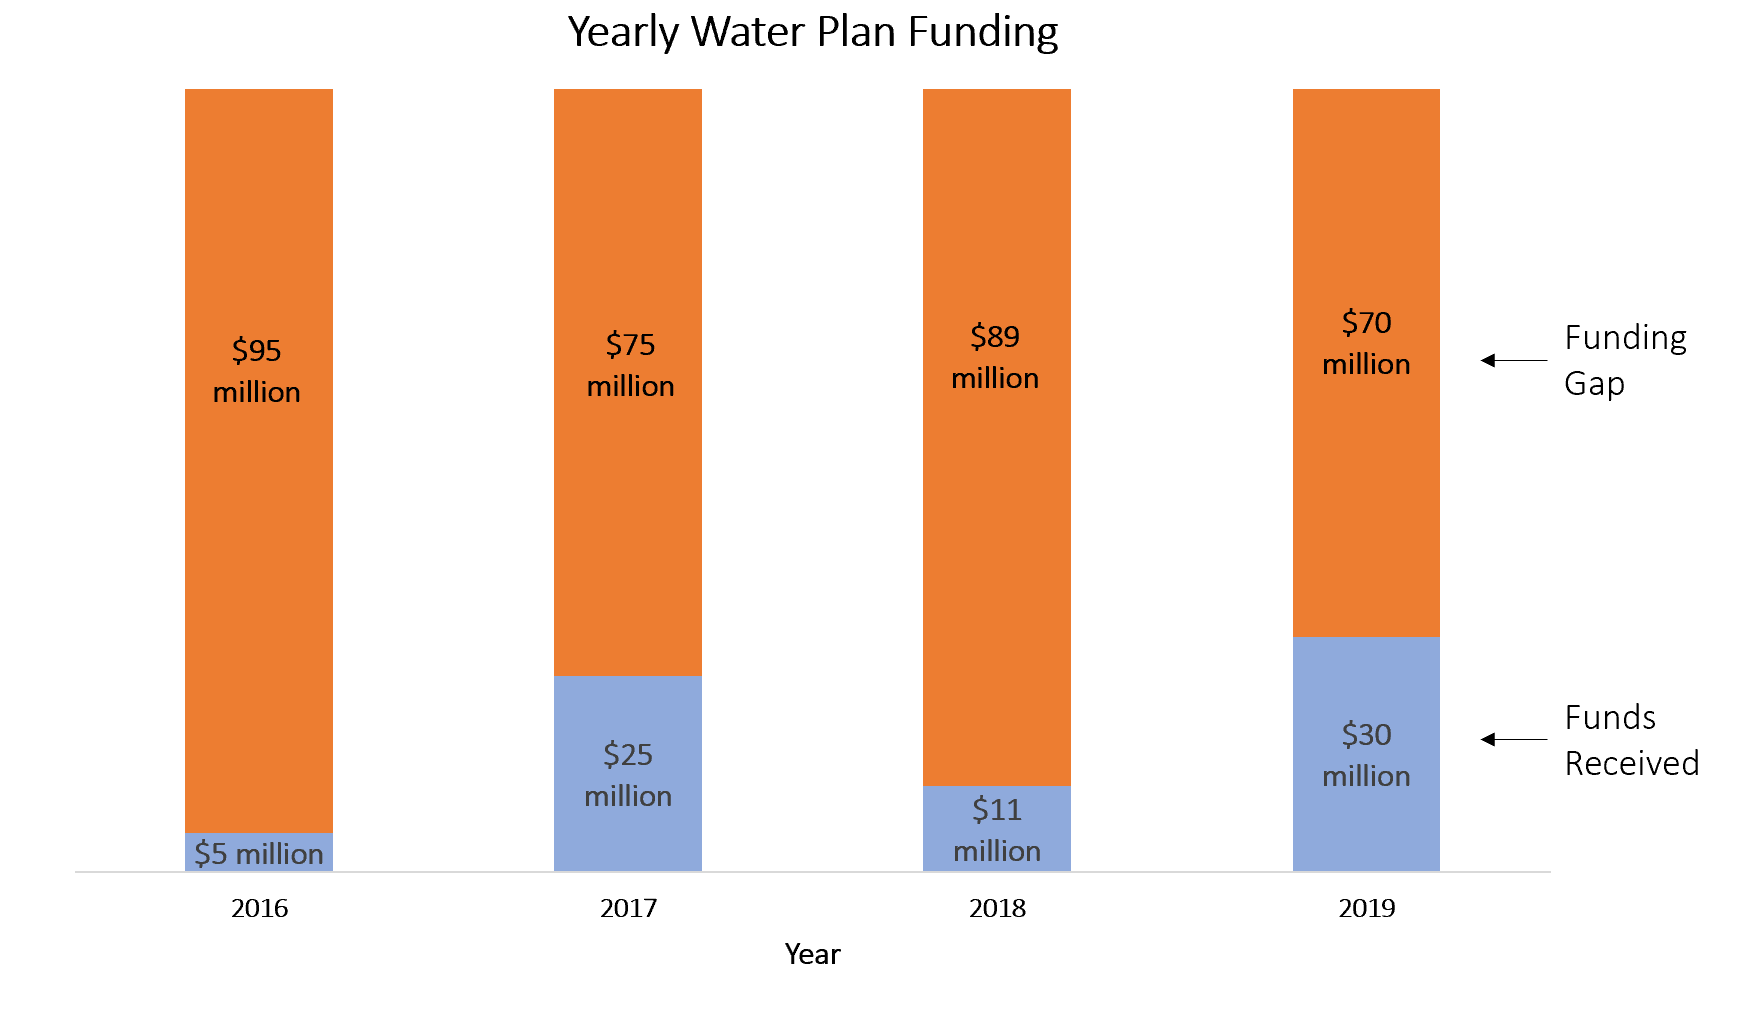 The Colorado Water Plan has received inconsistent funding.